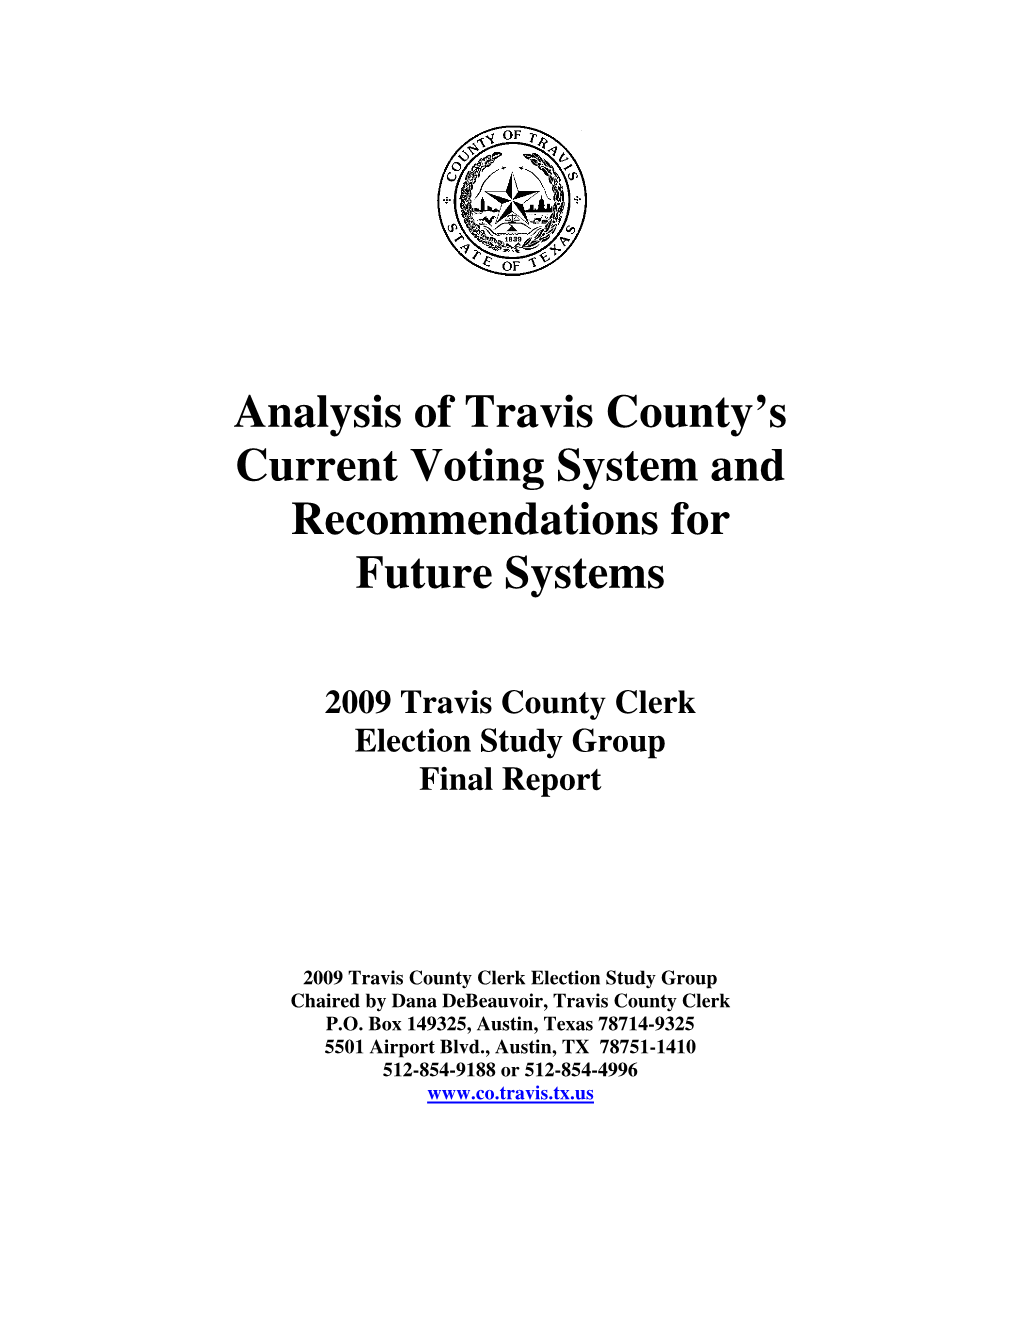 2009-10 County Clerk Election Study Group Final